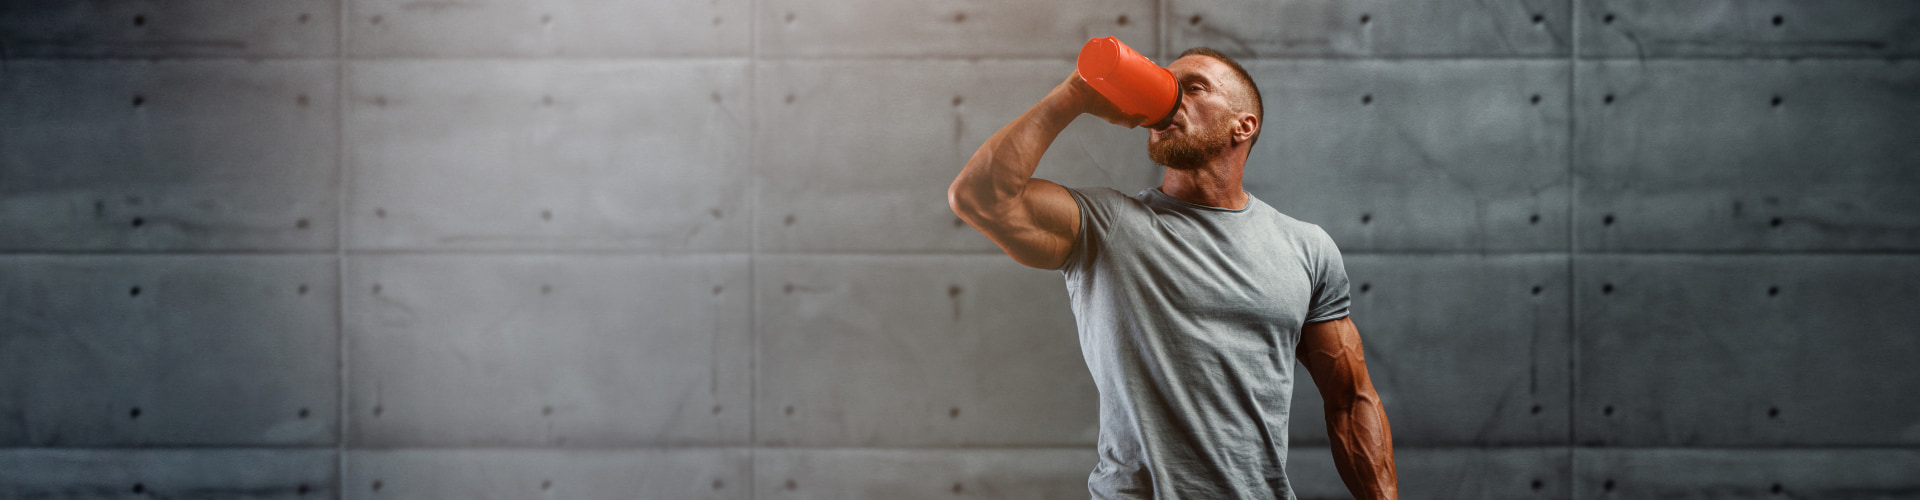 The Future of Workout Supplements: Powders, Pre-Workout, and More